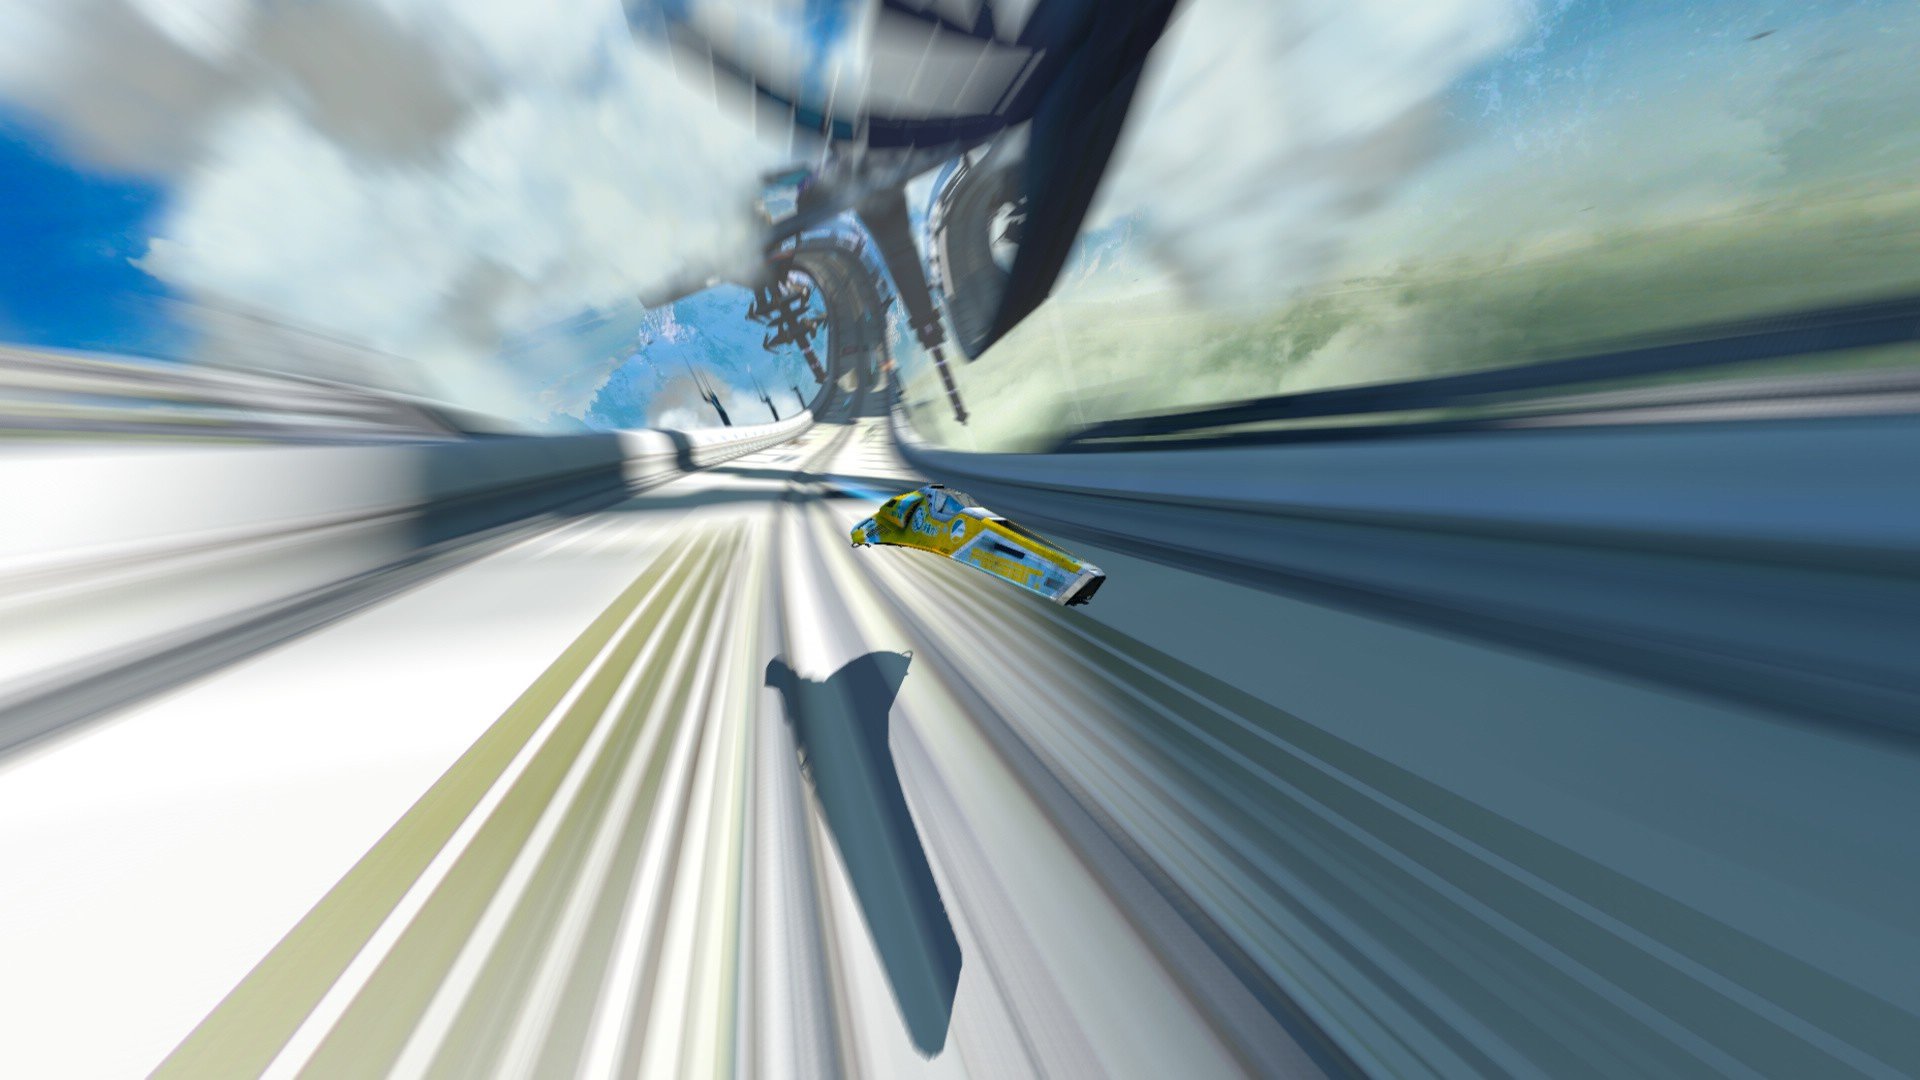 Wipeout Wipeout Hd Racing Playstation 3 Futuristic Wallpapers Hd Desktop And Mobile Backgrounds